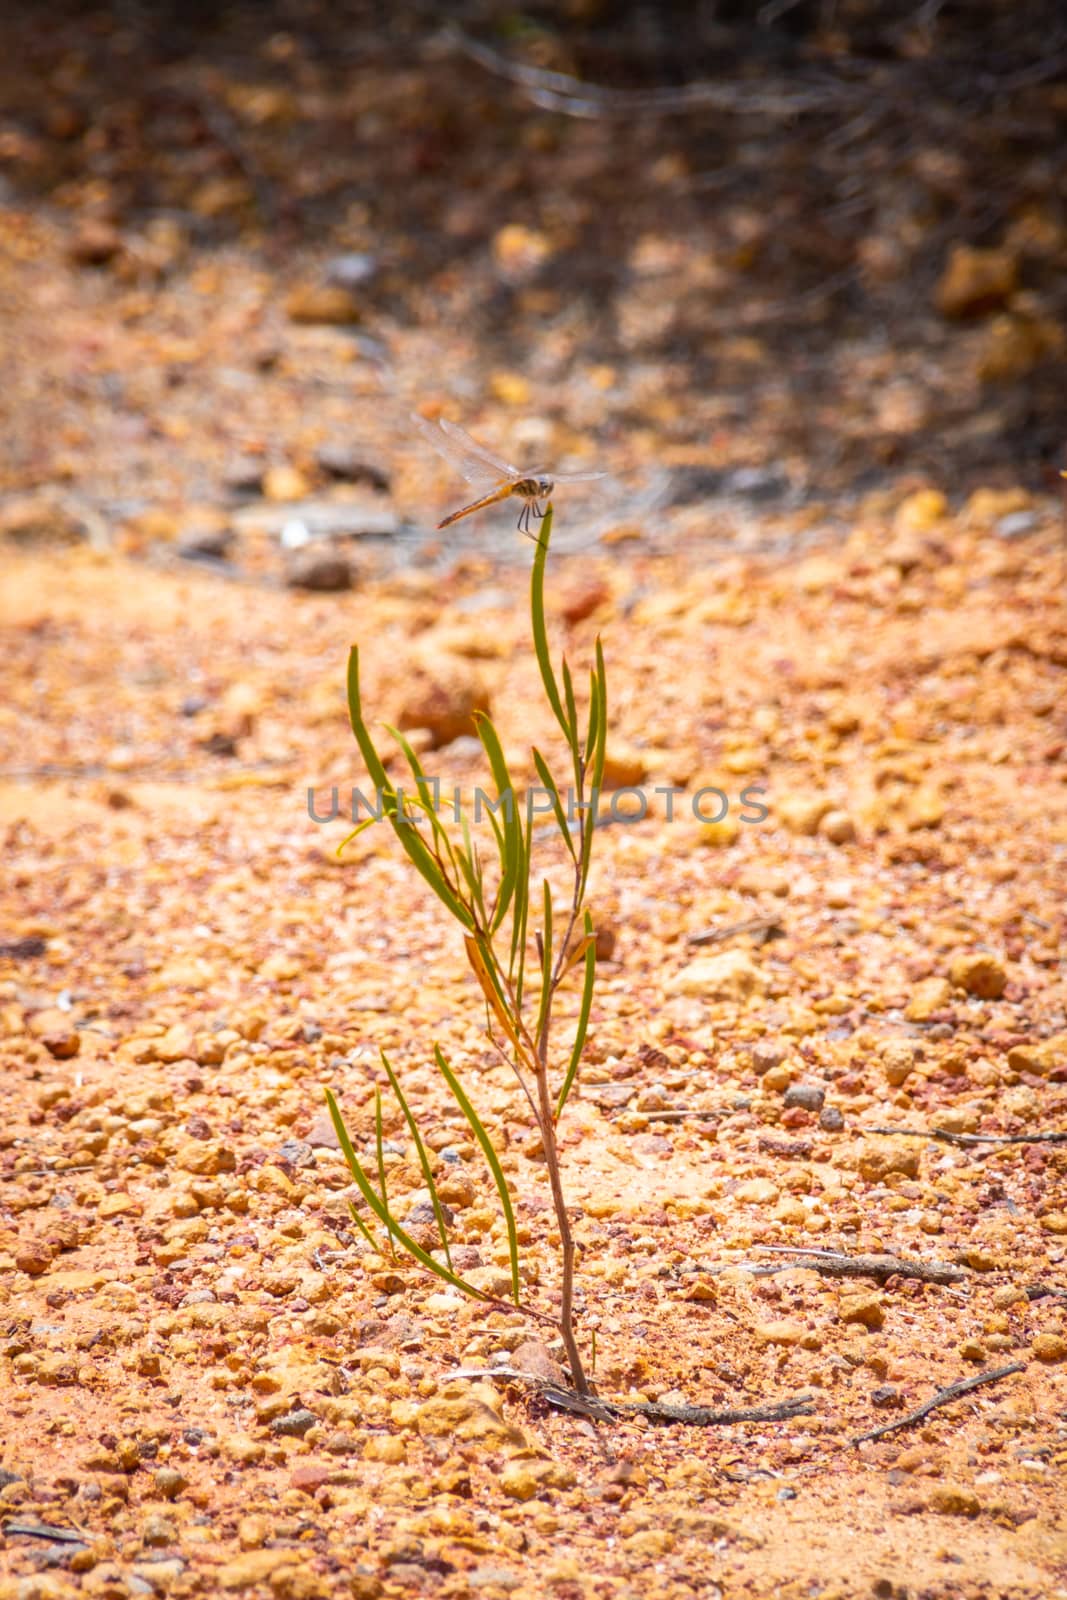 Dragon fly sitting on top of small plant in Australian Outback